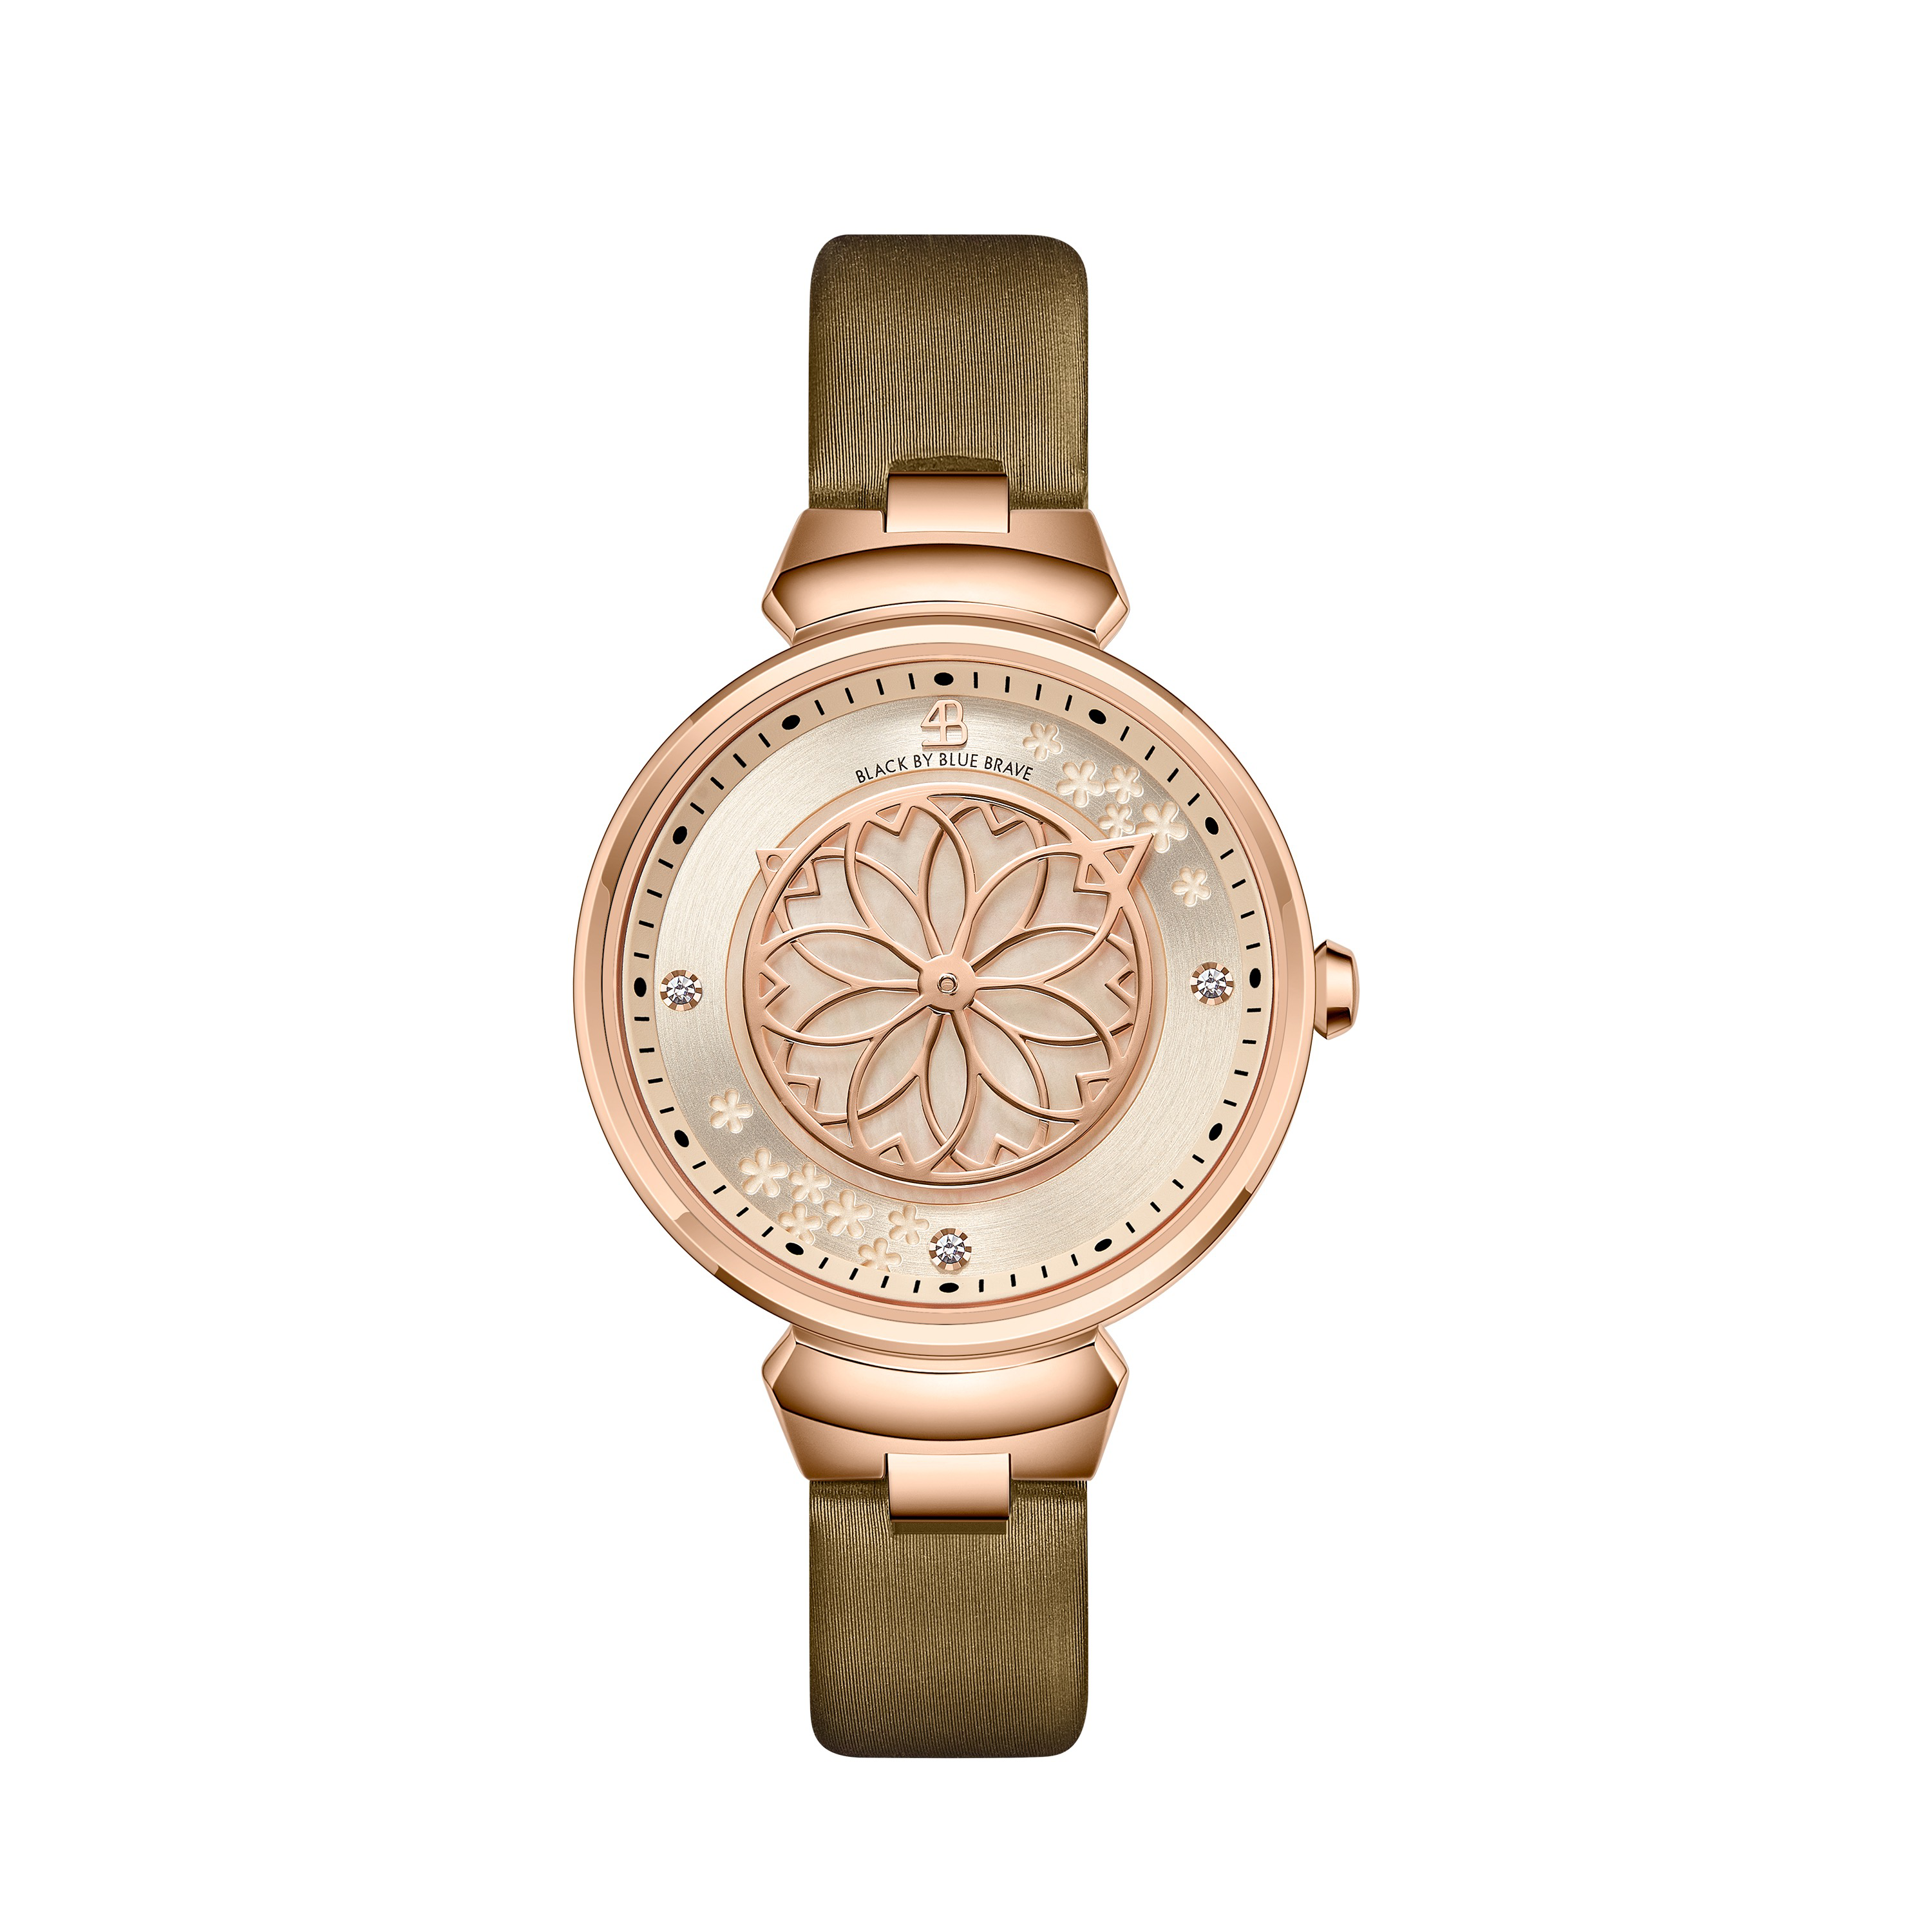 Champagne Cherry Blossom Watch With Rosegold Bracelet & White Ceramic